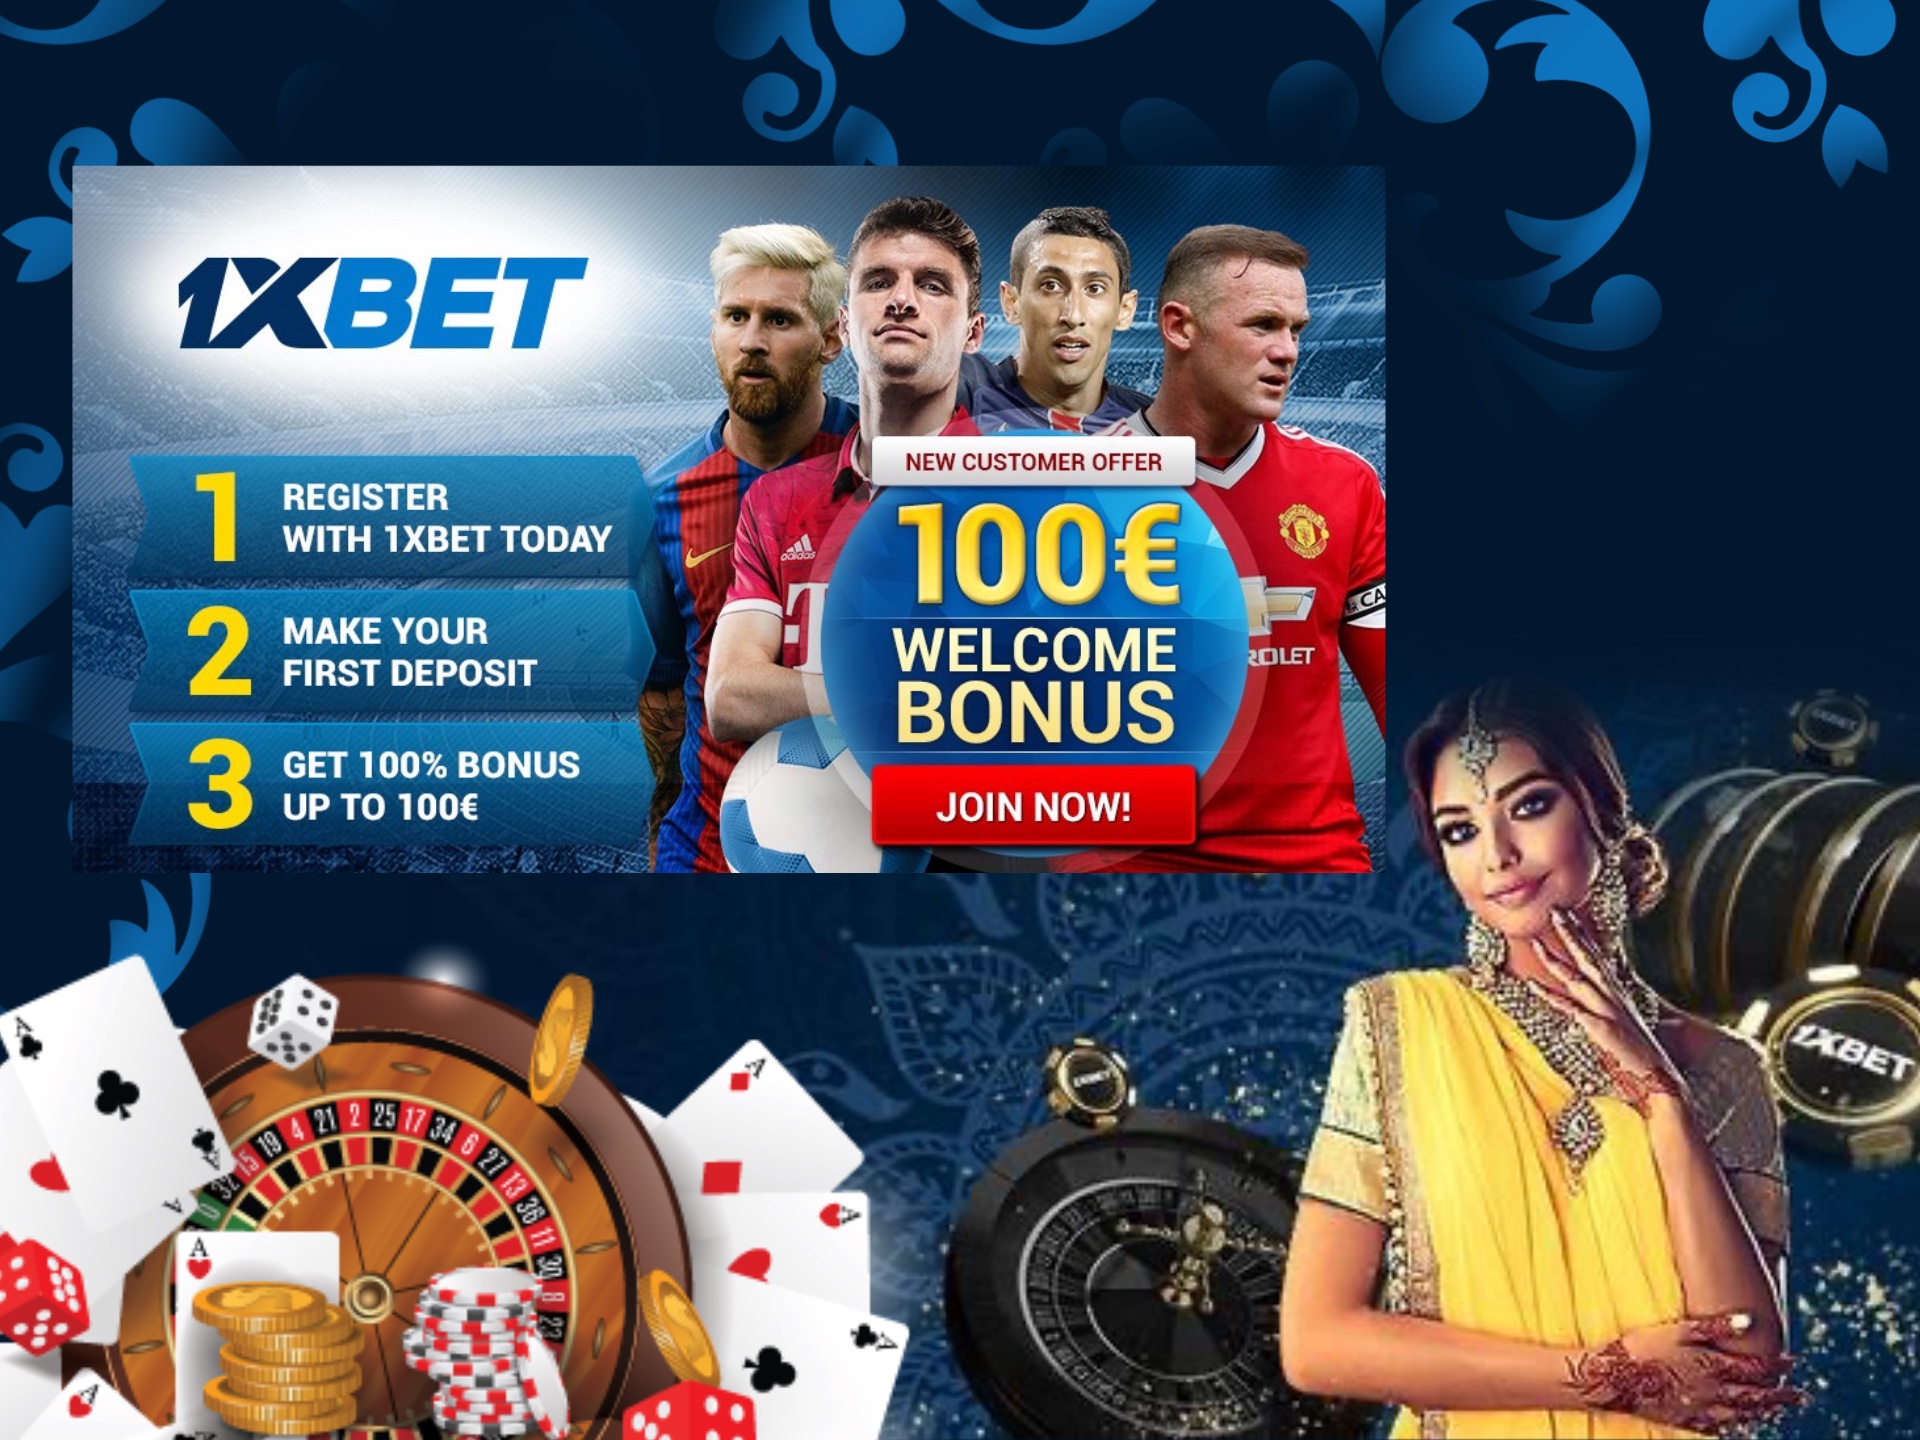 Register at 1xbet casino, get your welcome bonus and start gambling.